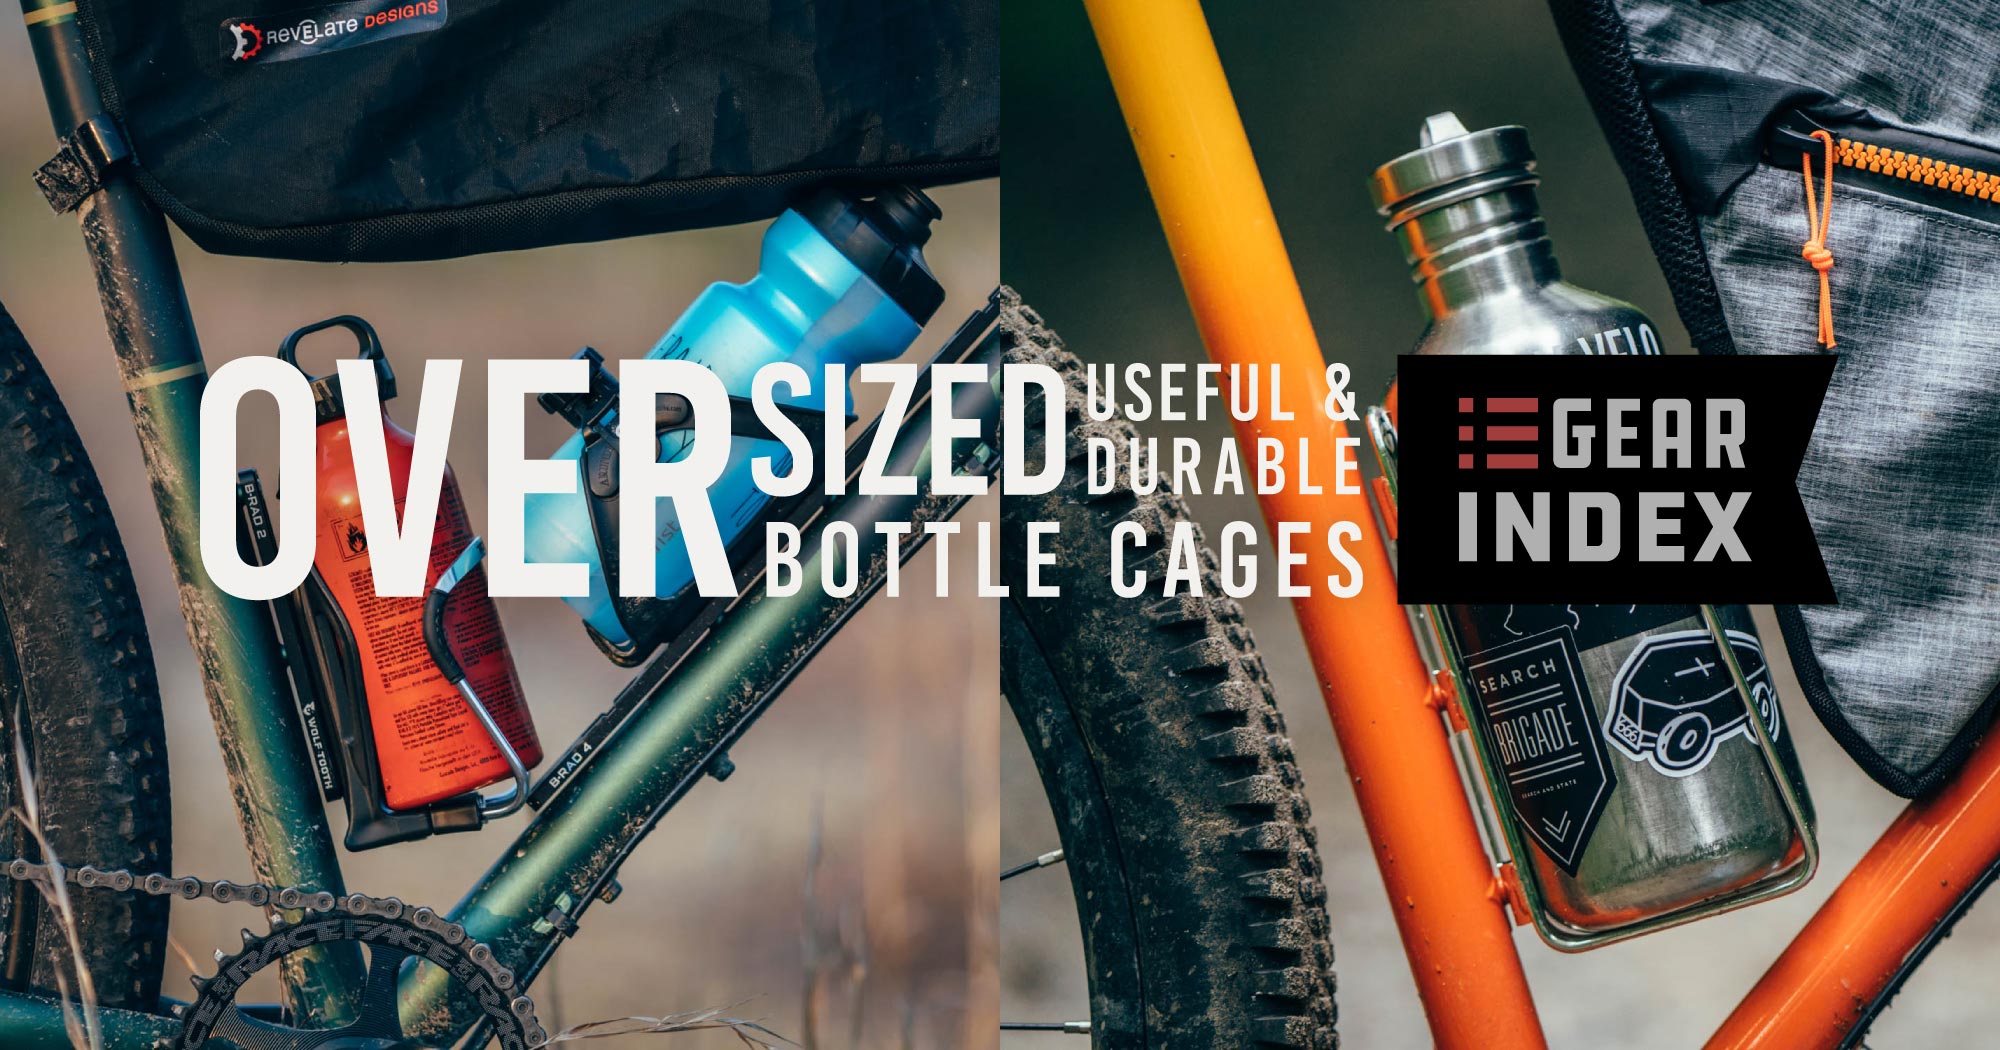 Bike Water Cage Perfect Holder Road Lightweight Strong Bicycle Easily Fix Bottle No Lost Bottles Quick Easy Mount Road Mountain Bikes